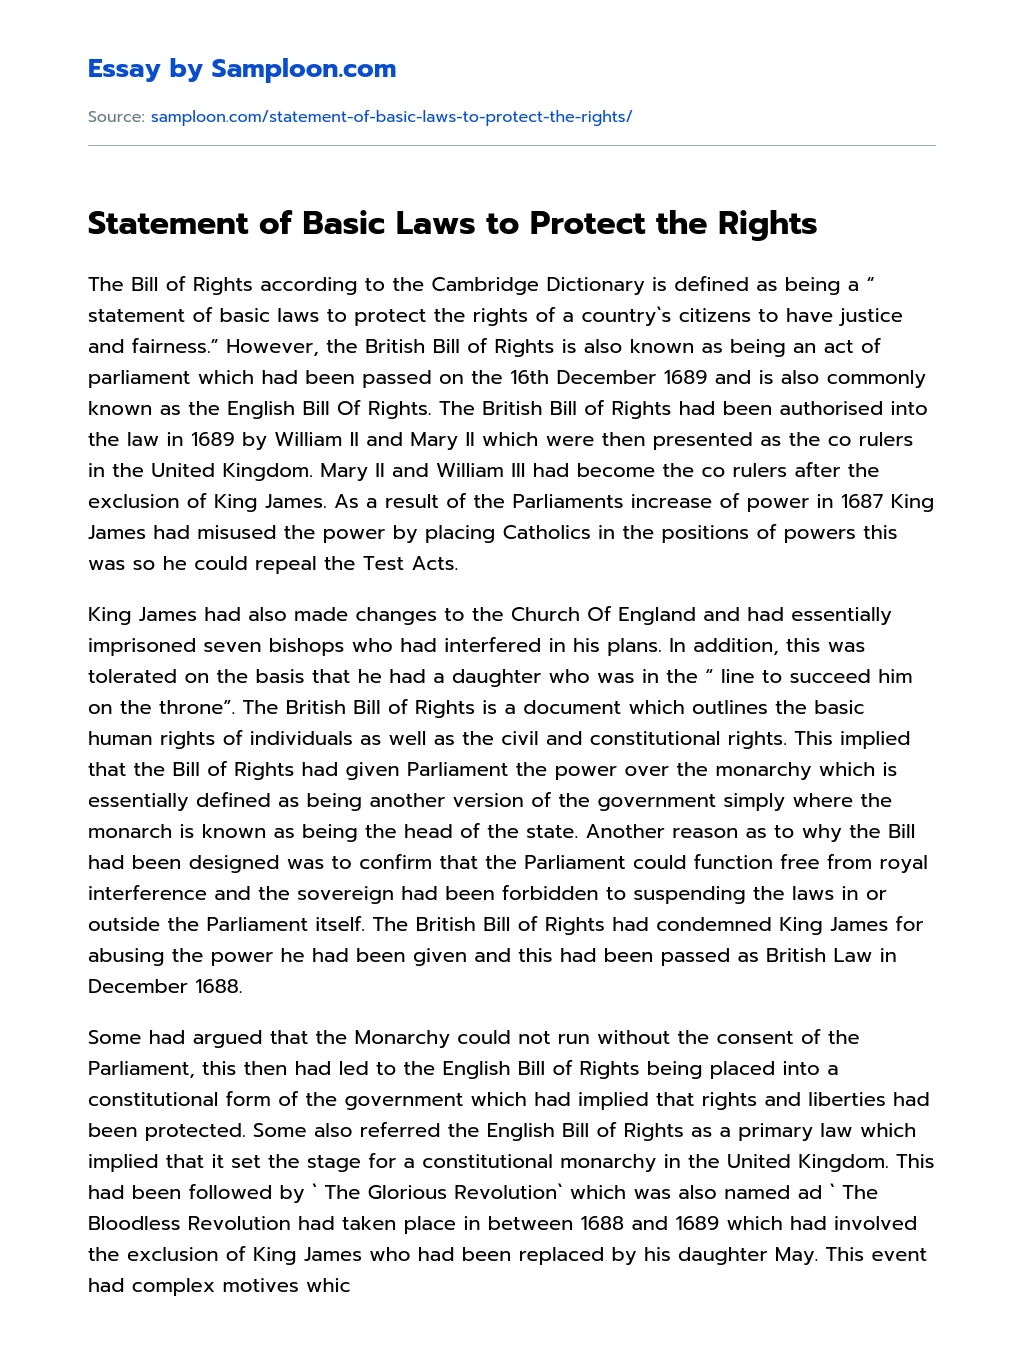 Statement of Basic Laws to Protect the Rights essay